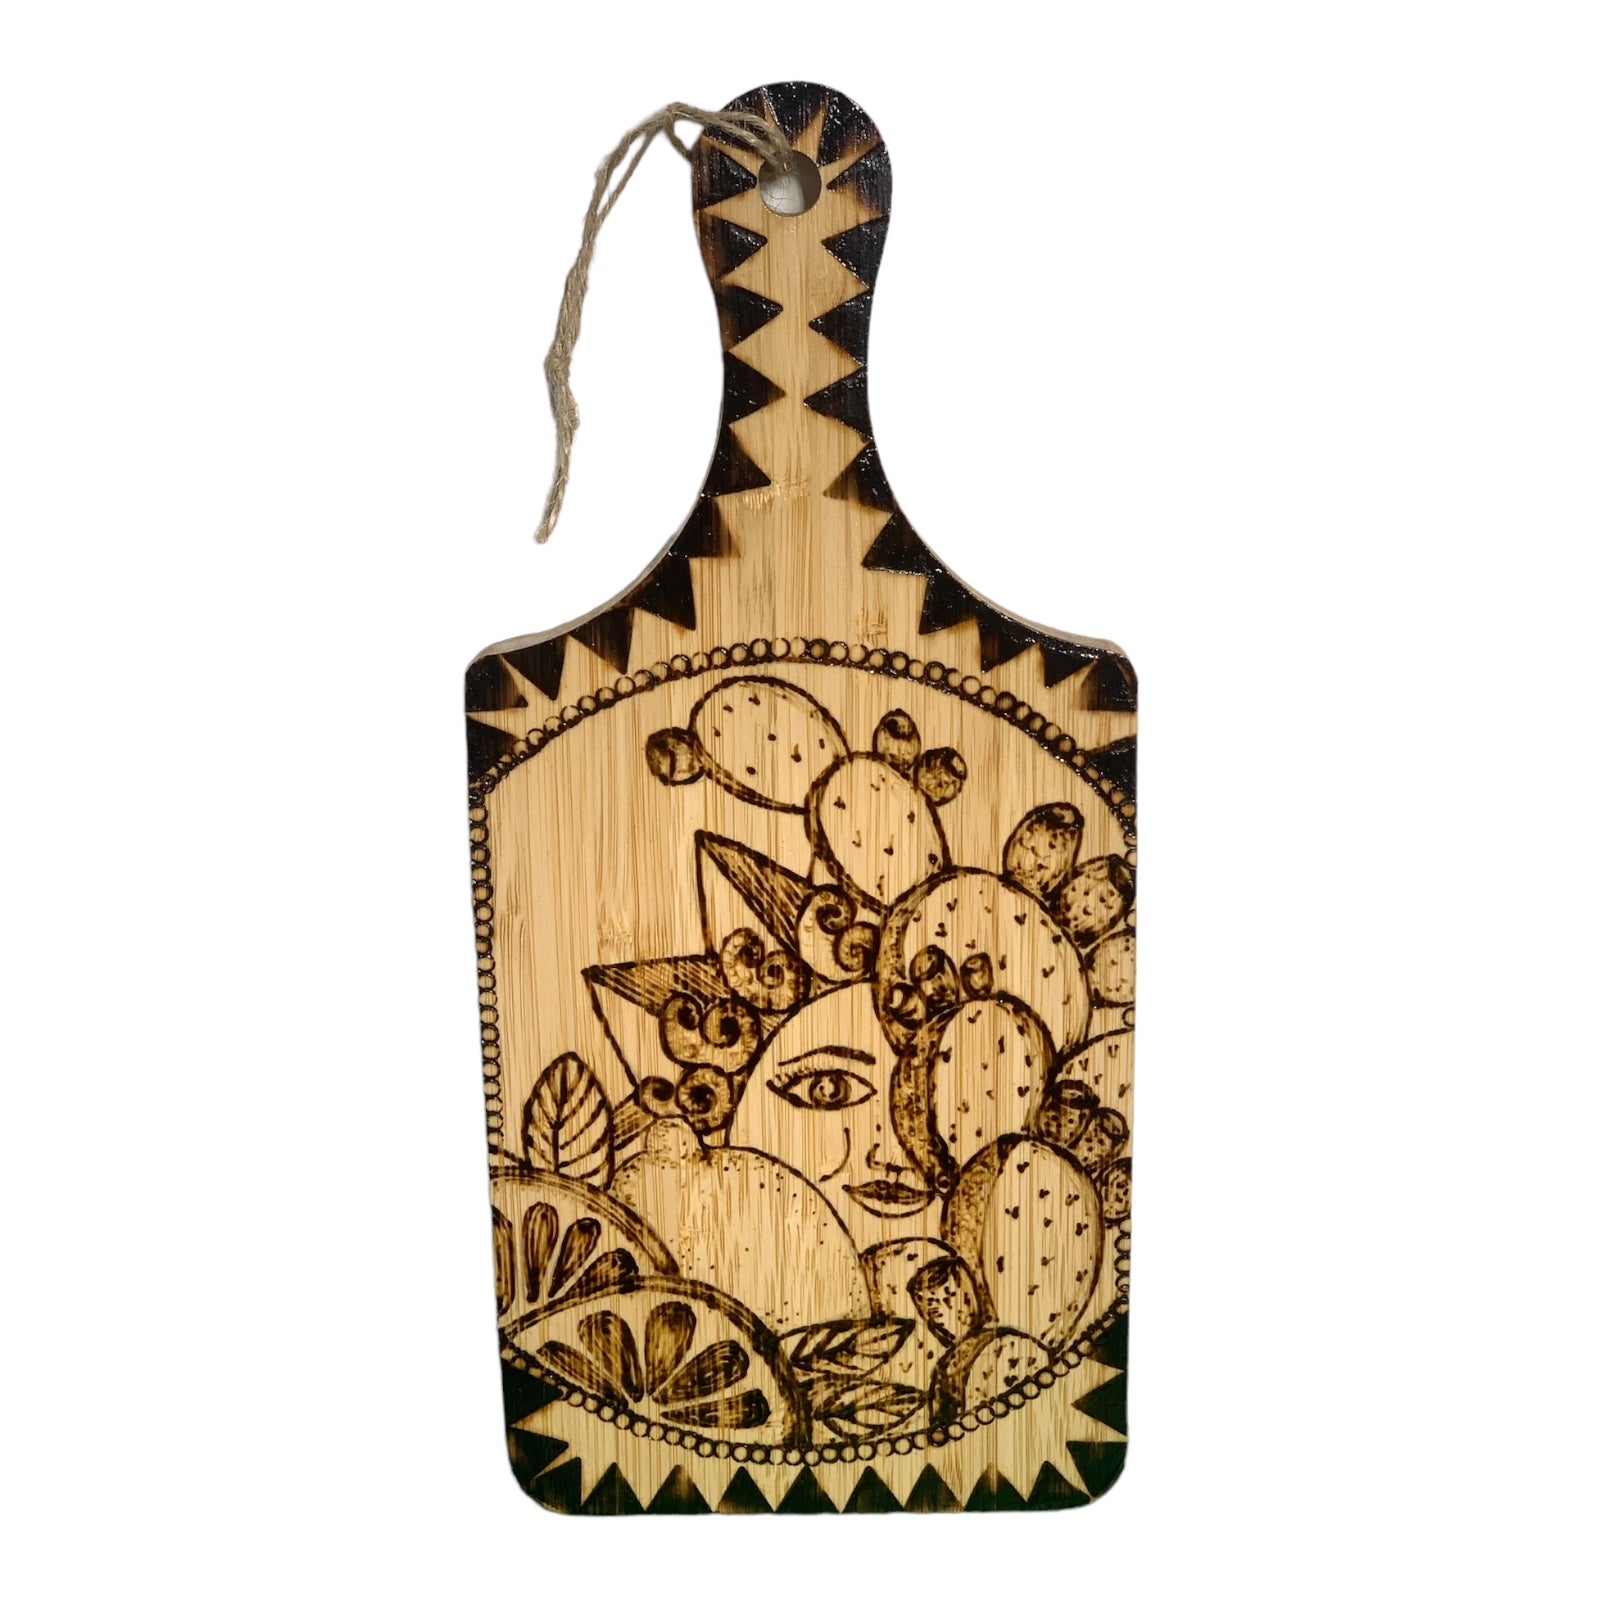 Engraved wooden Board Sun, Prickly Pear & Lemon Wood Fired